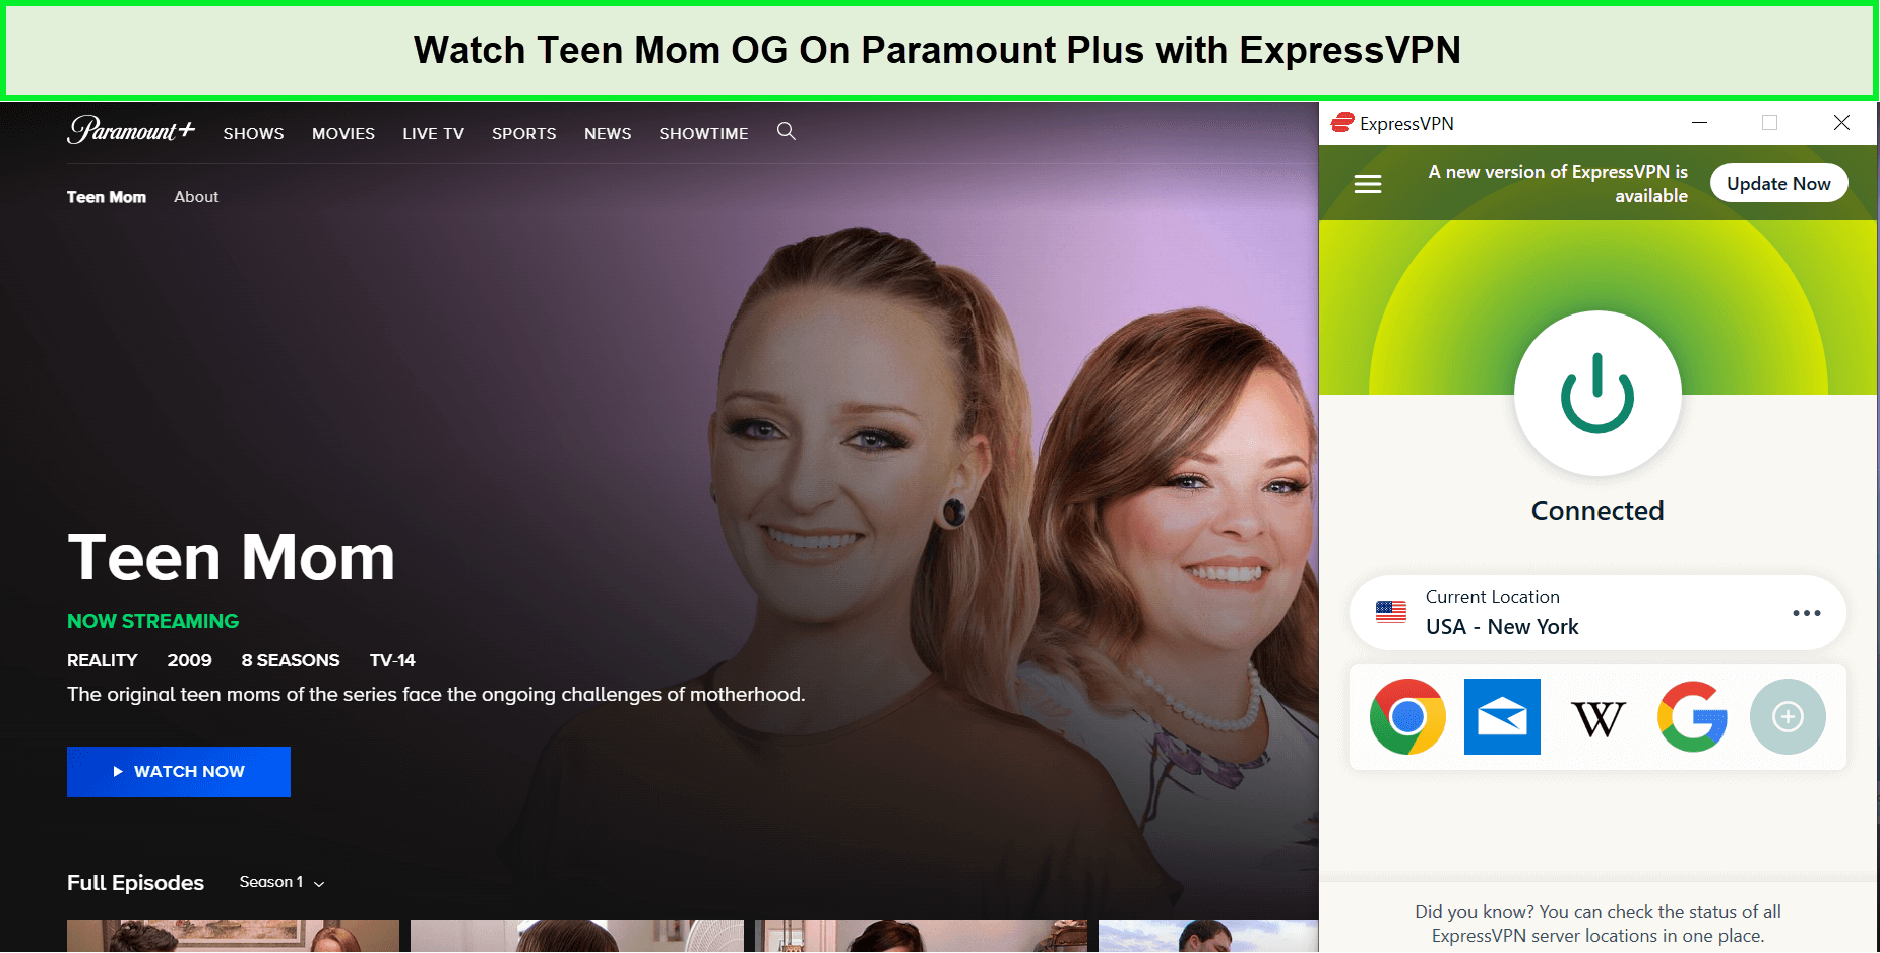 Watch-Teen-Mom-OG-Season-9-in-India-On-Paramount-Plus-with-ExpressVPN